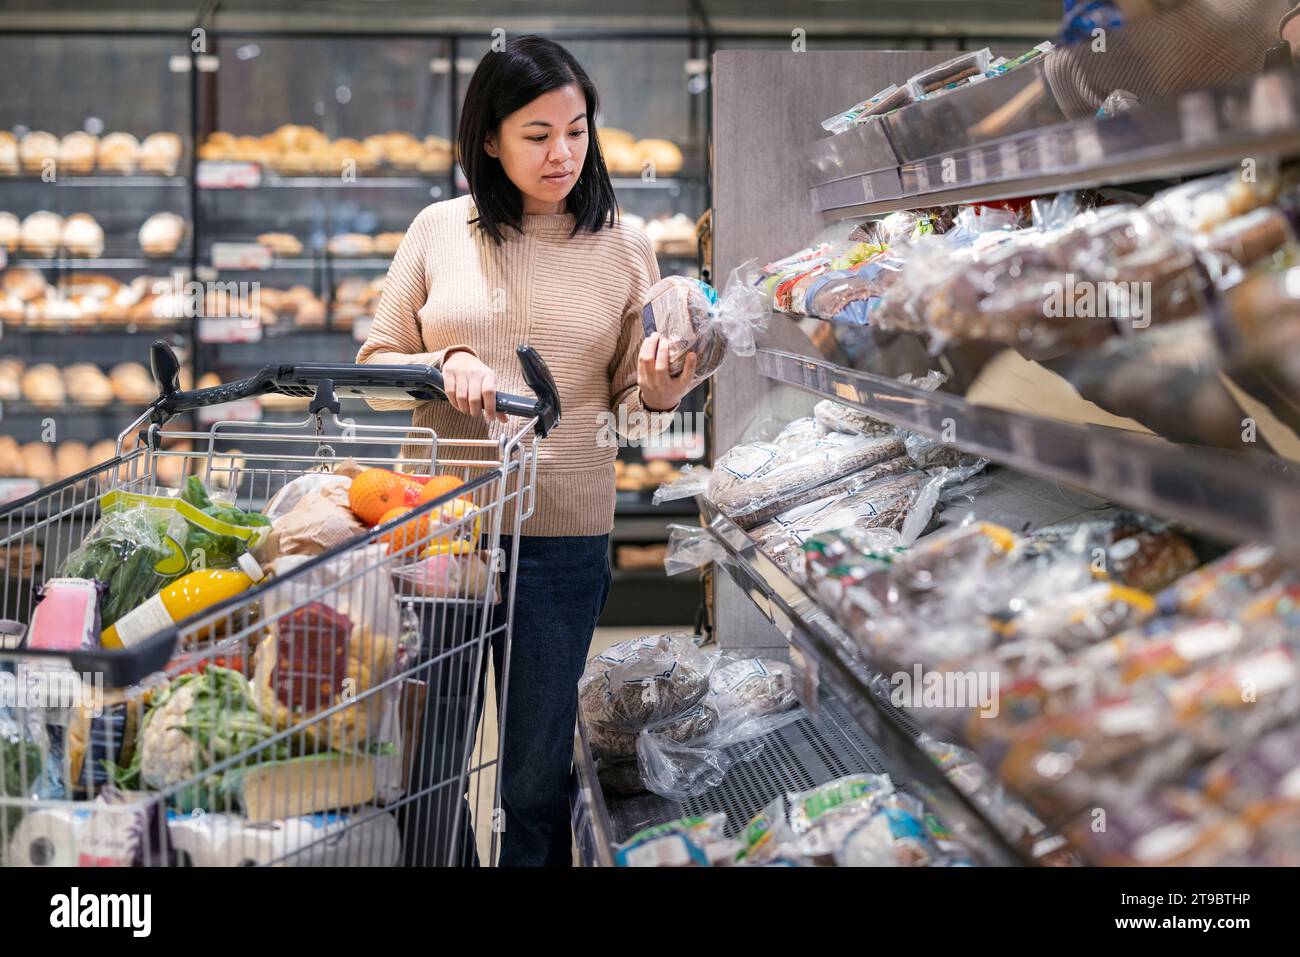 Young woman reading label on bread package while shopping for groceries in supermarket Stock Photo